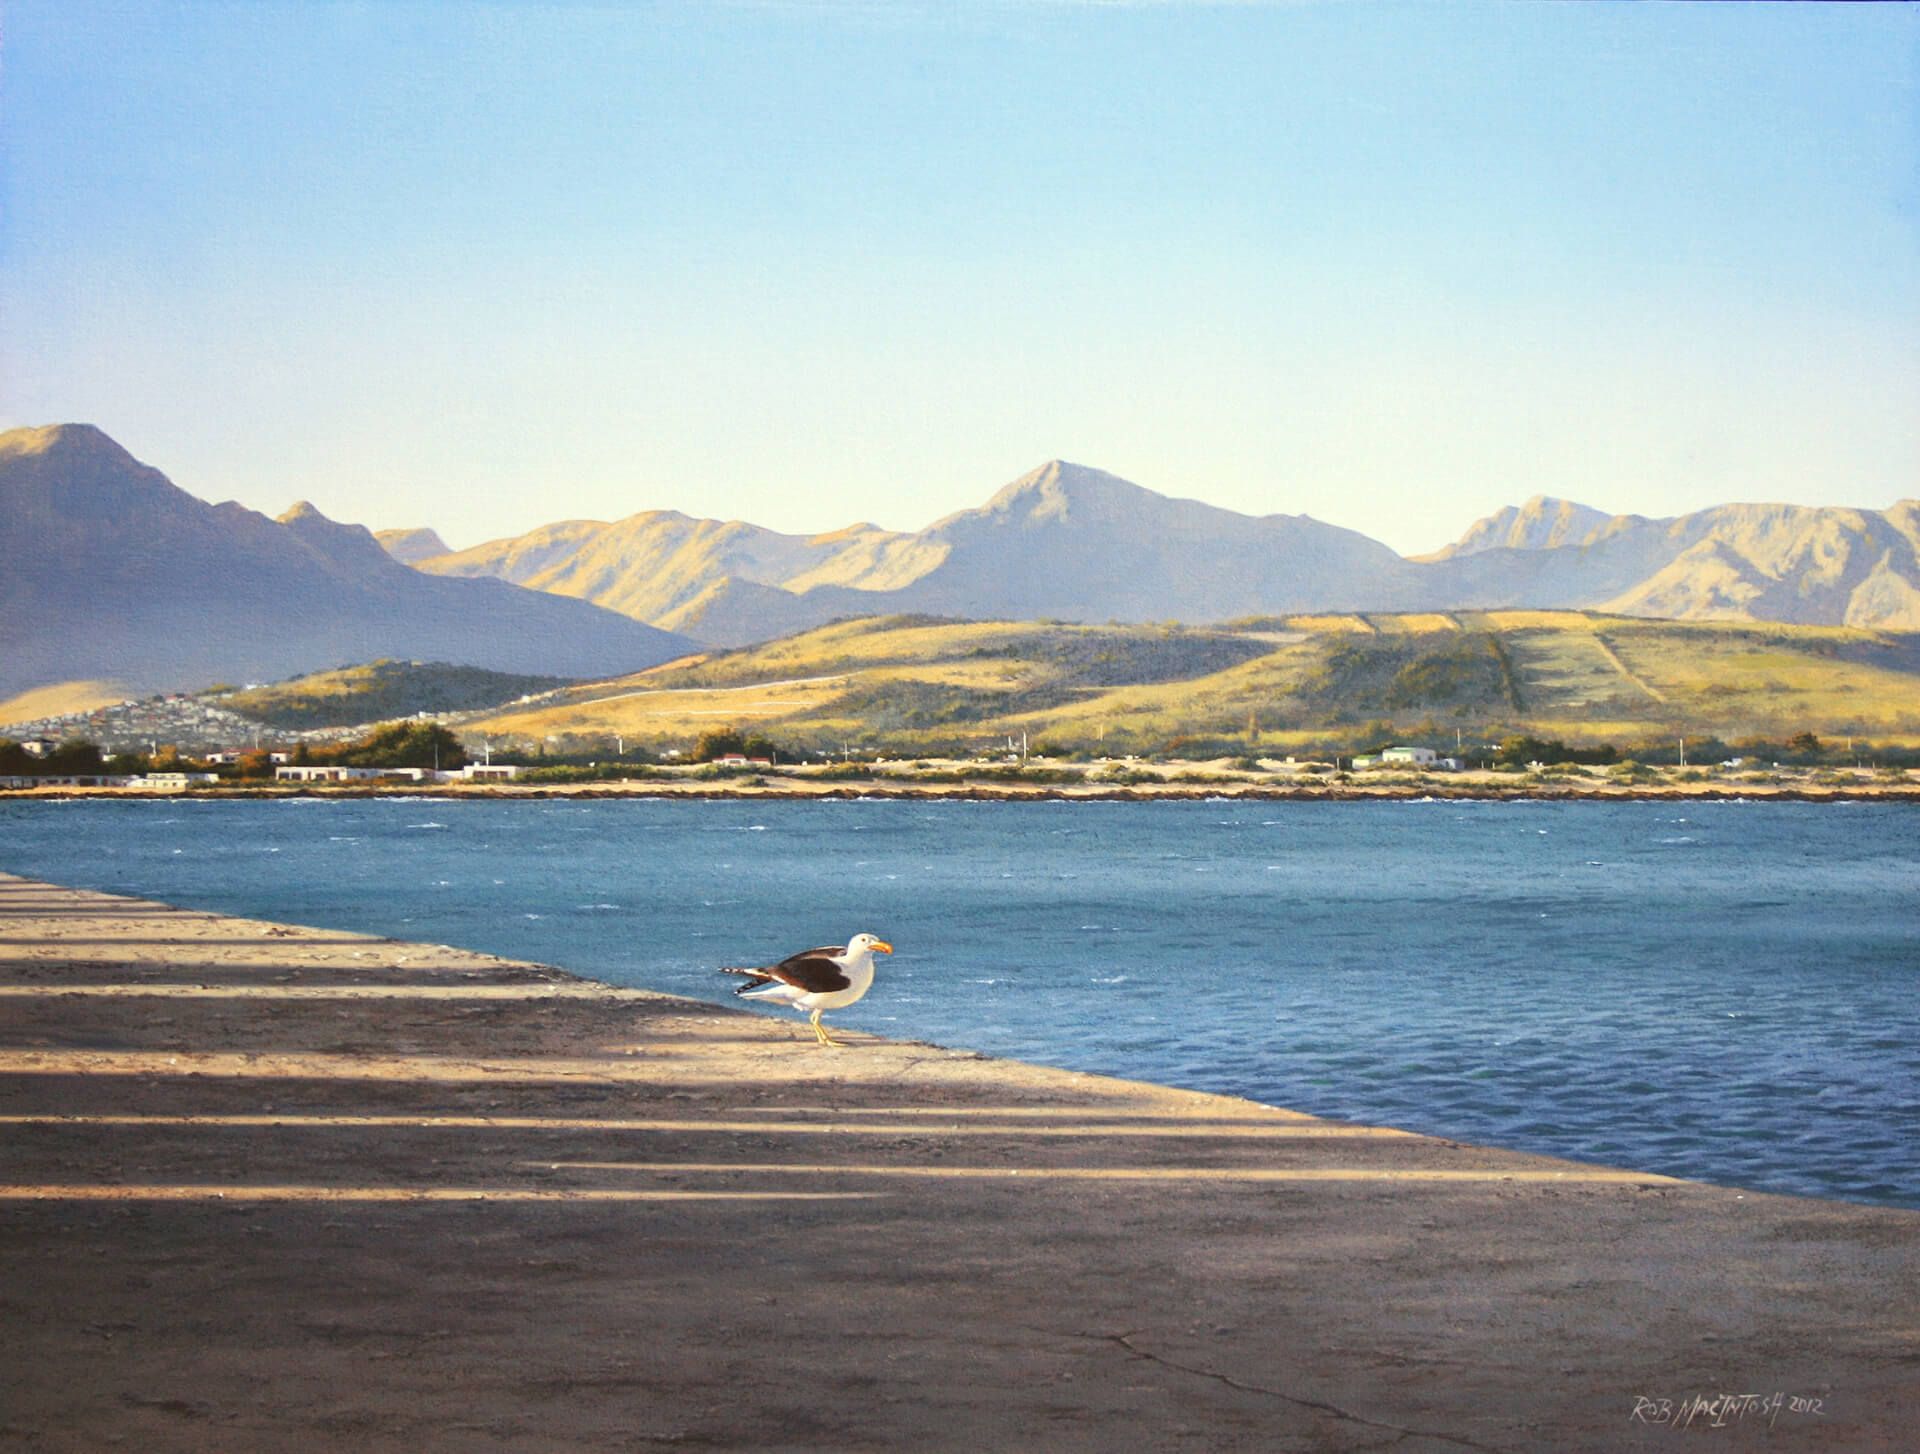 Photorealistic painting of a lone seagull on a beach